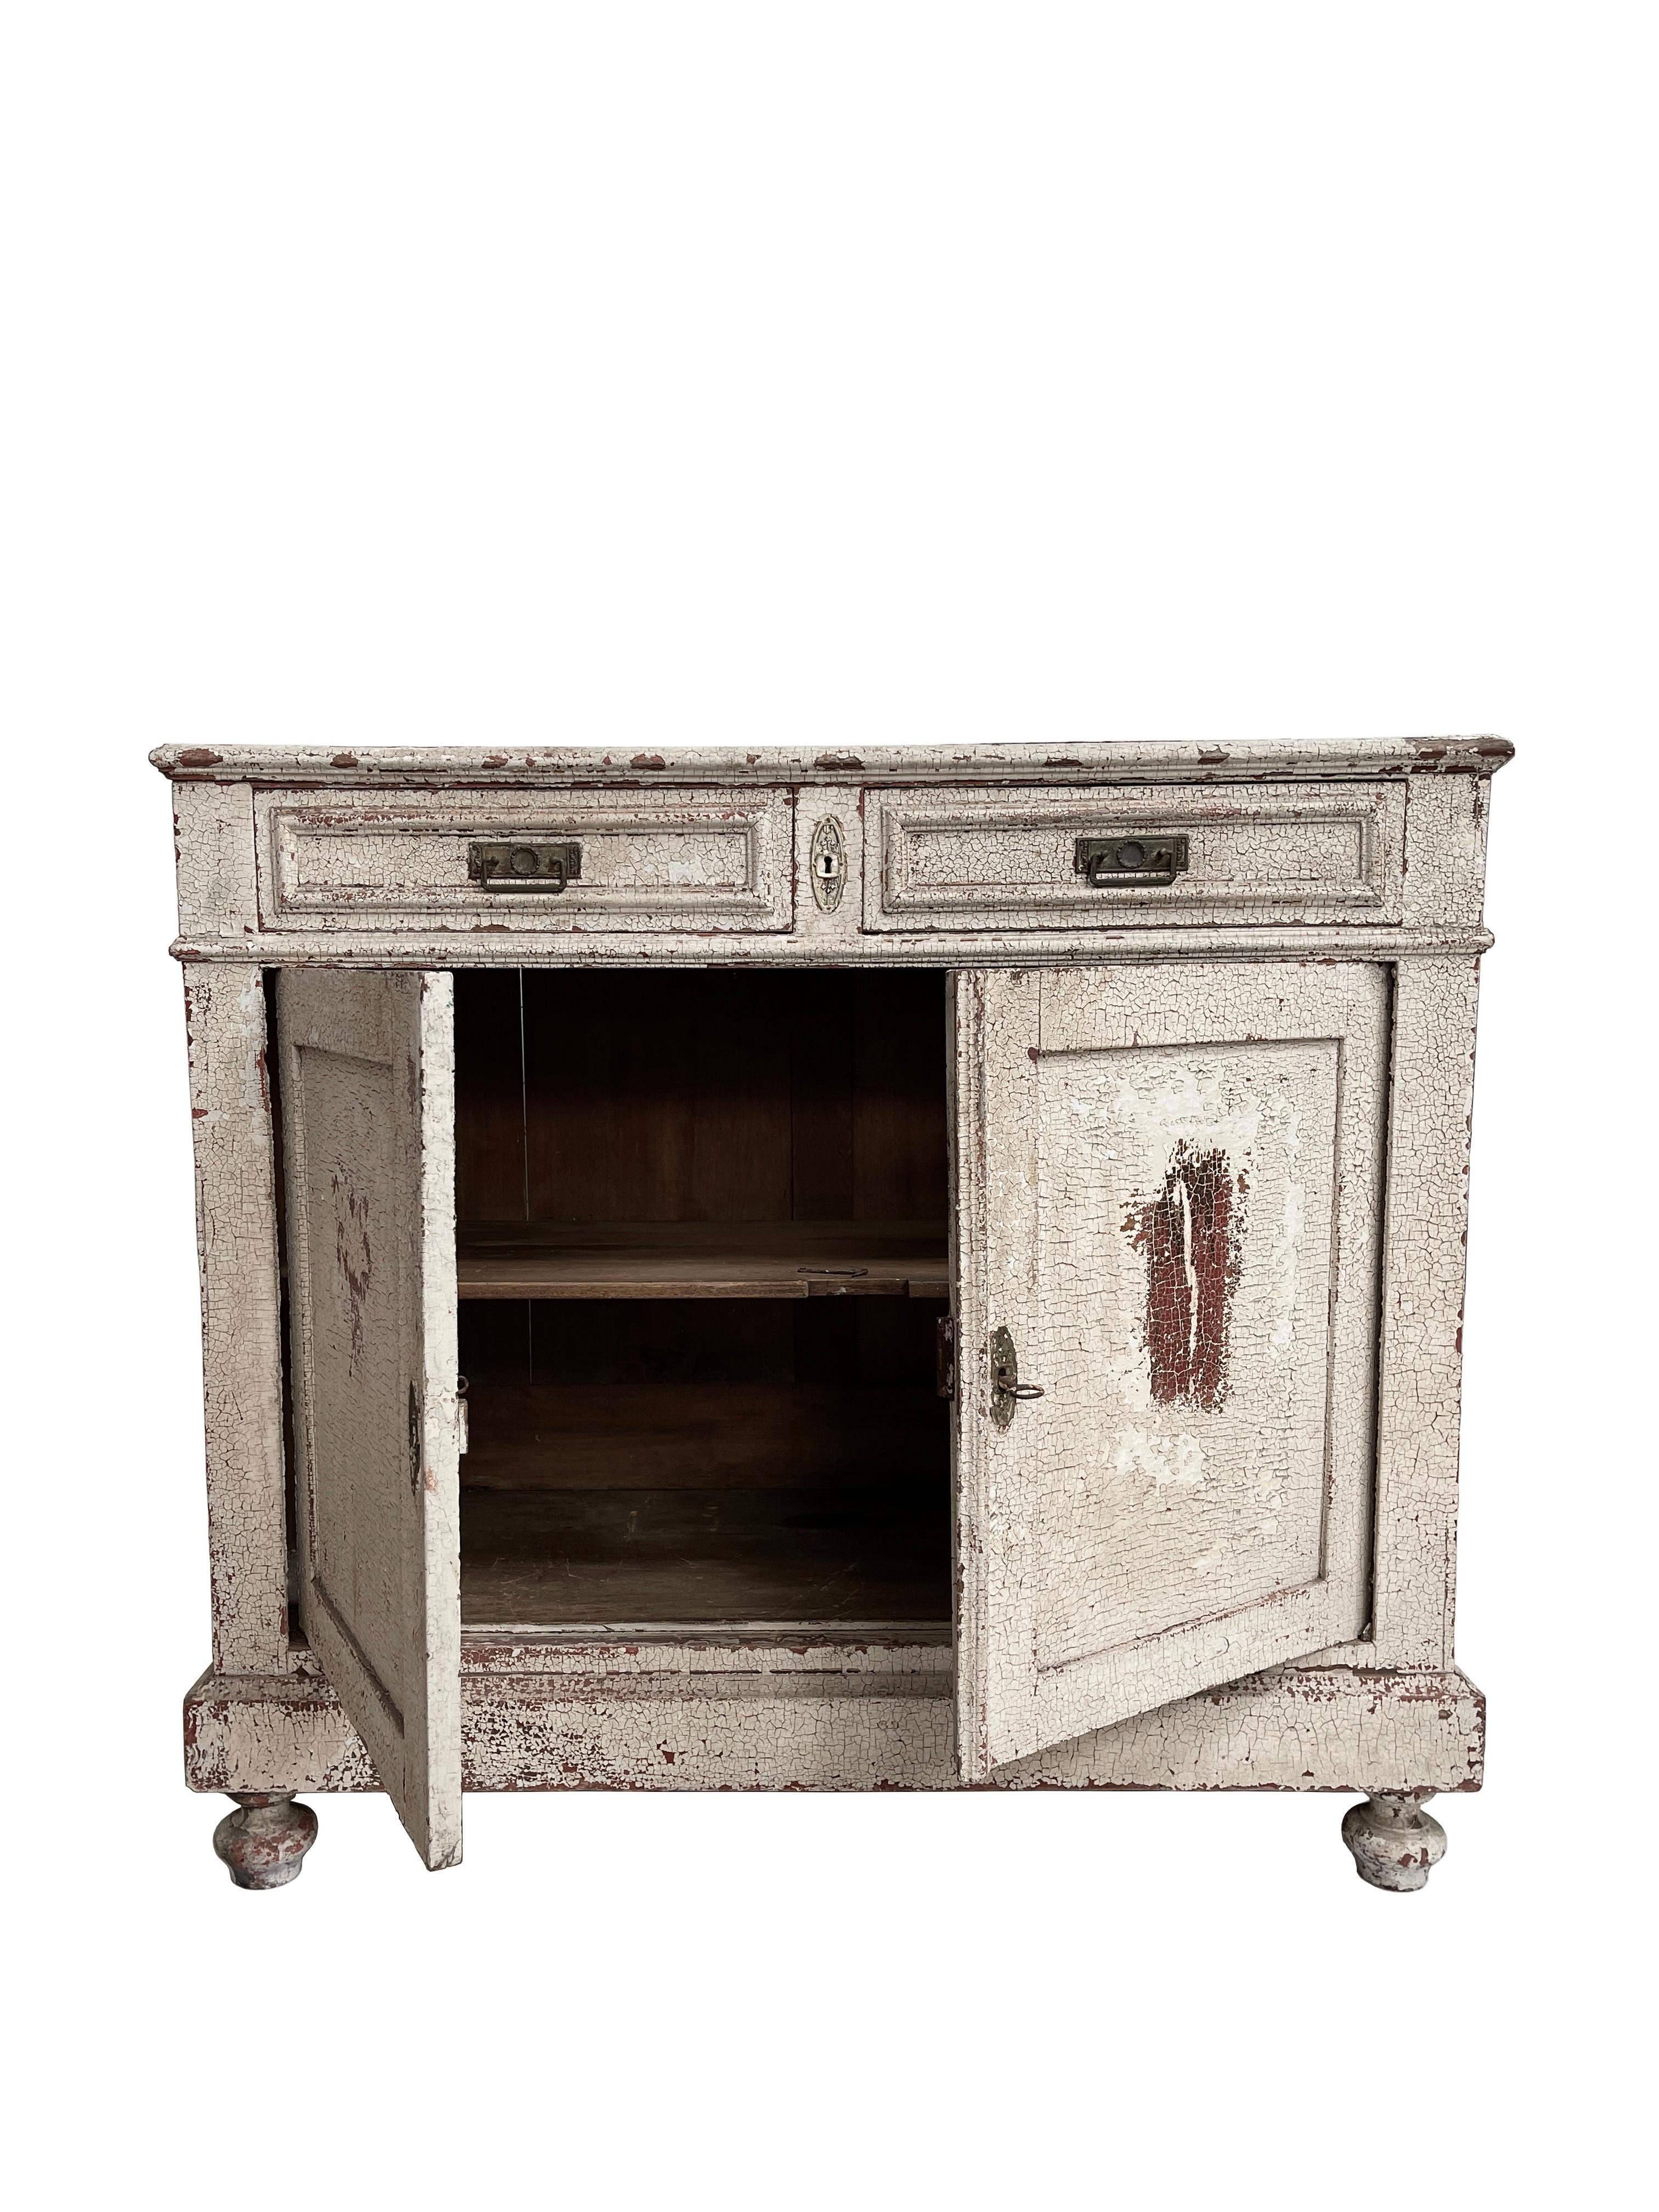 19th Century Antique Vintage Industrial French Haberdashery Cabinet Sideboard Chest Drawers For Sale